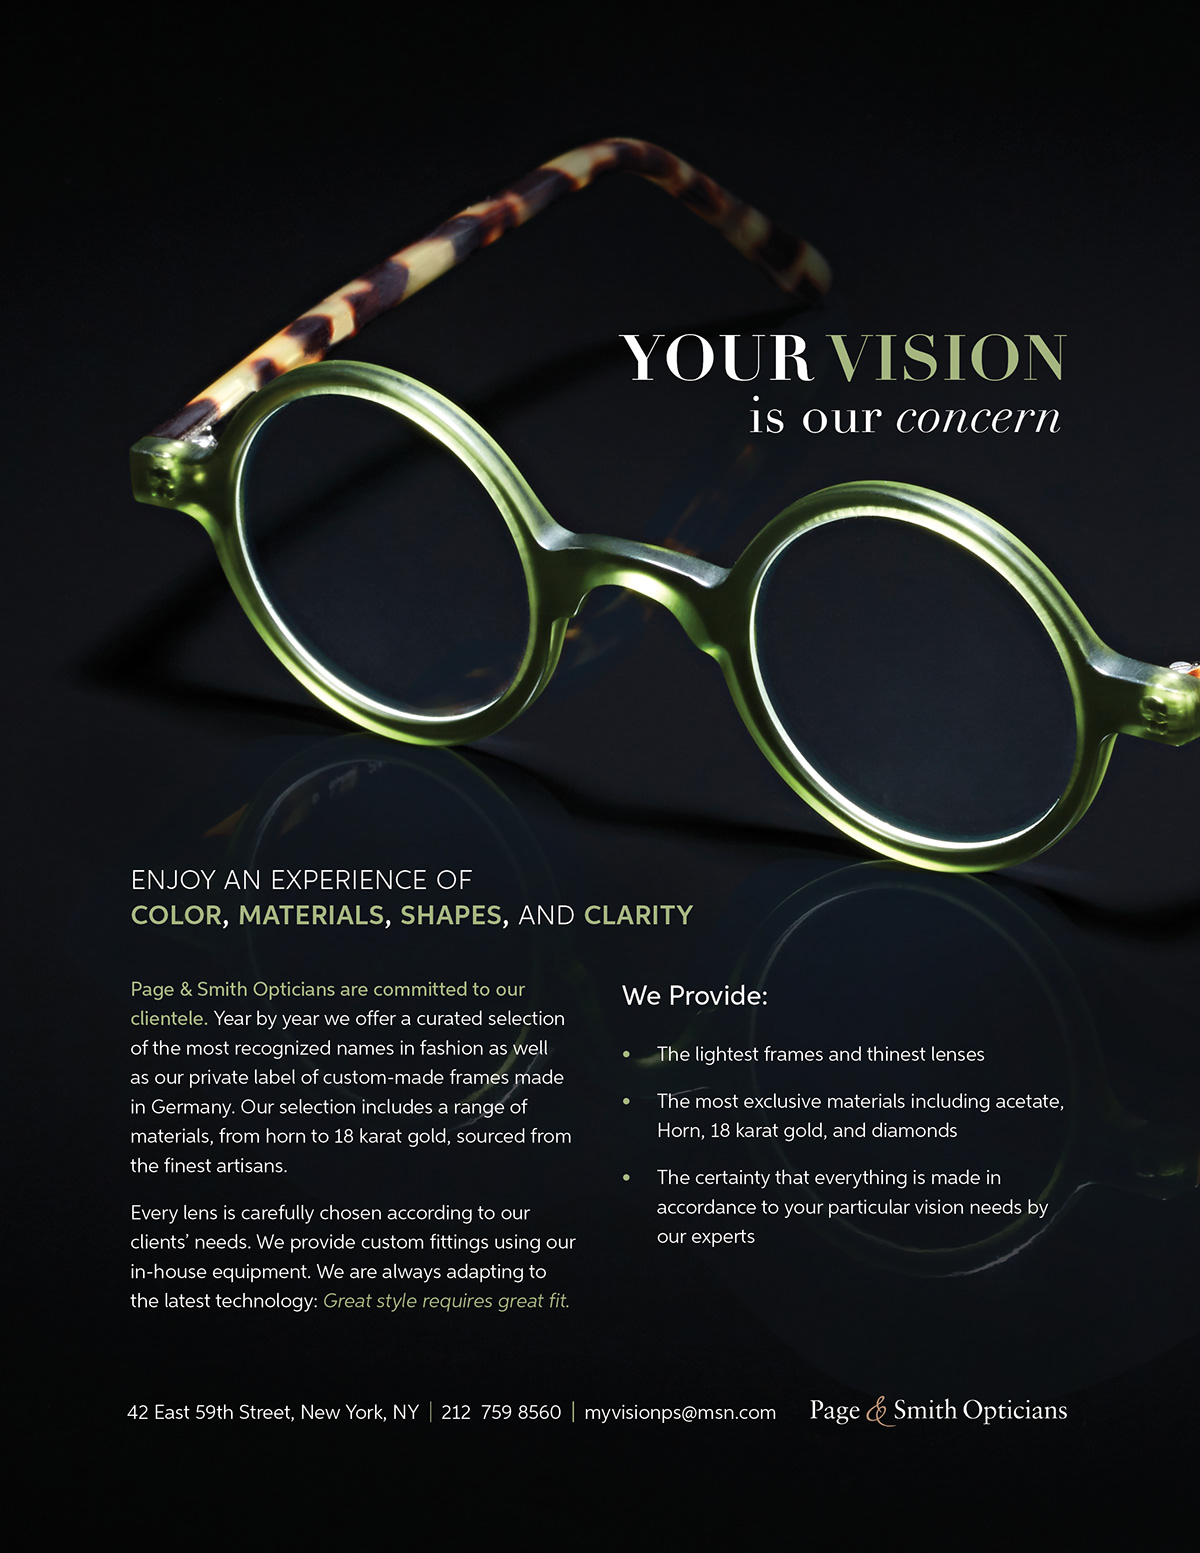 This is a flyer I designed for a local eyeglass store in NYC.